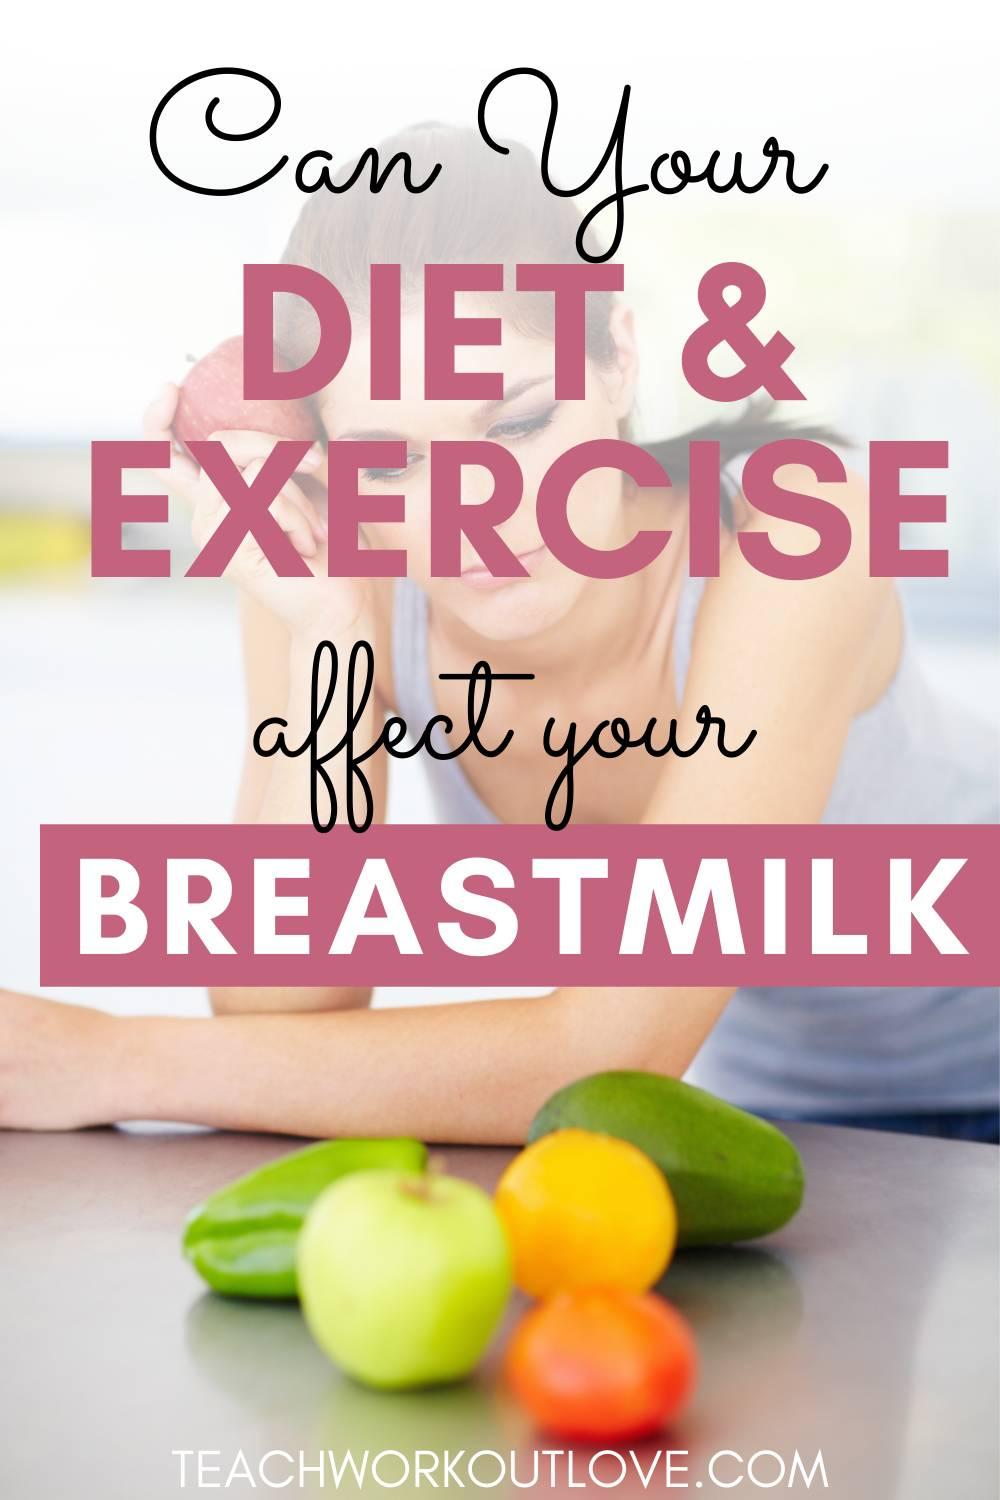 Can a mother’s diet and exercise affect her breastmilk quality? Find out how you can provide the best breastmilk for your little one.